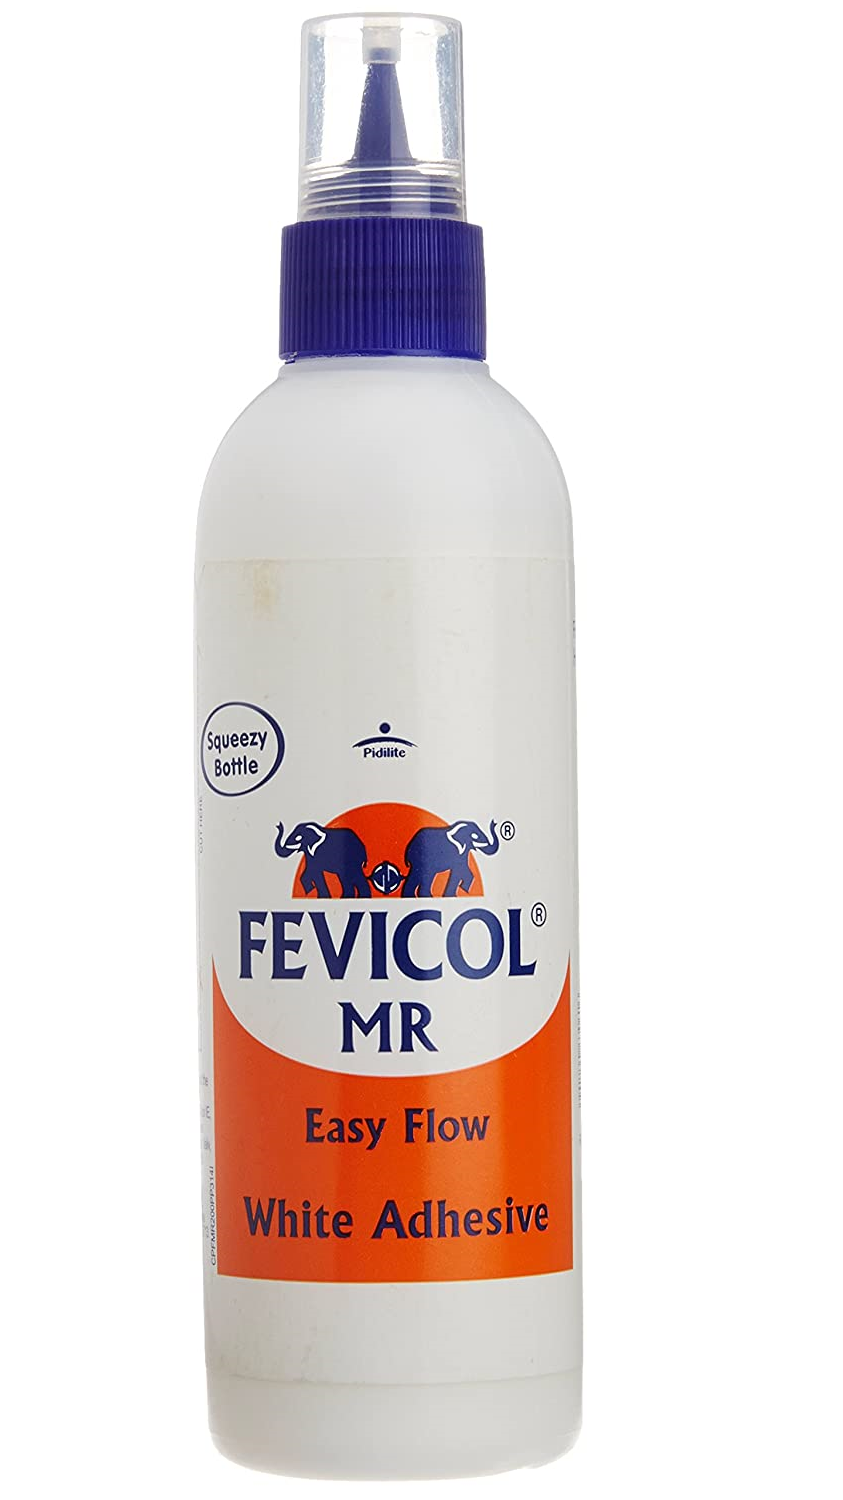 Fevicol MR Squeeze Bottle, 200 grams